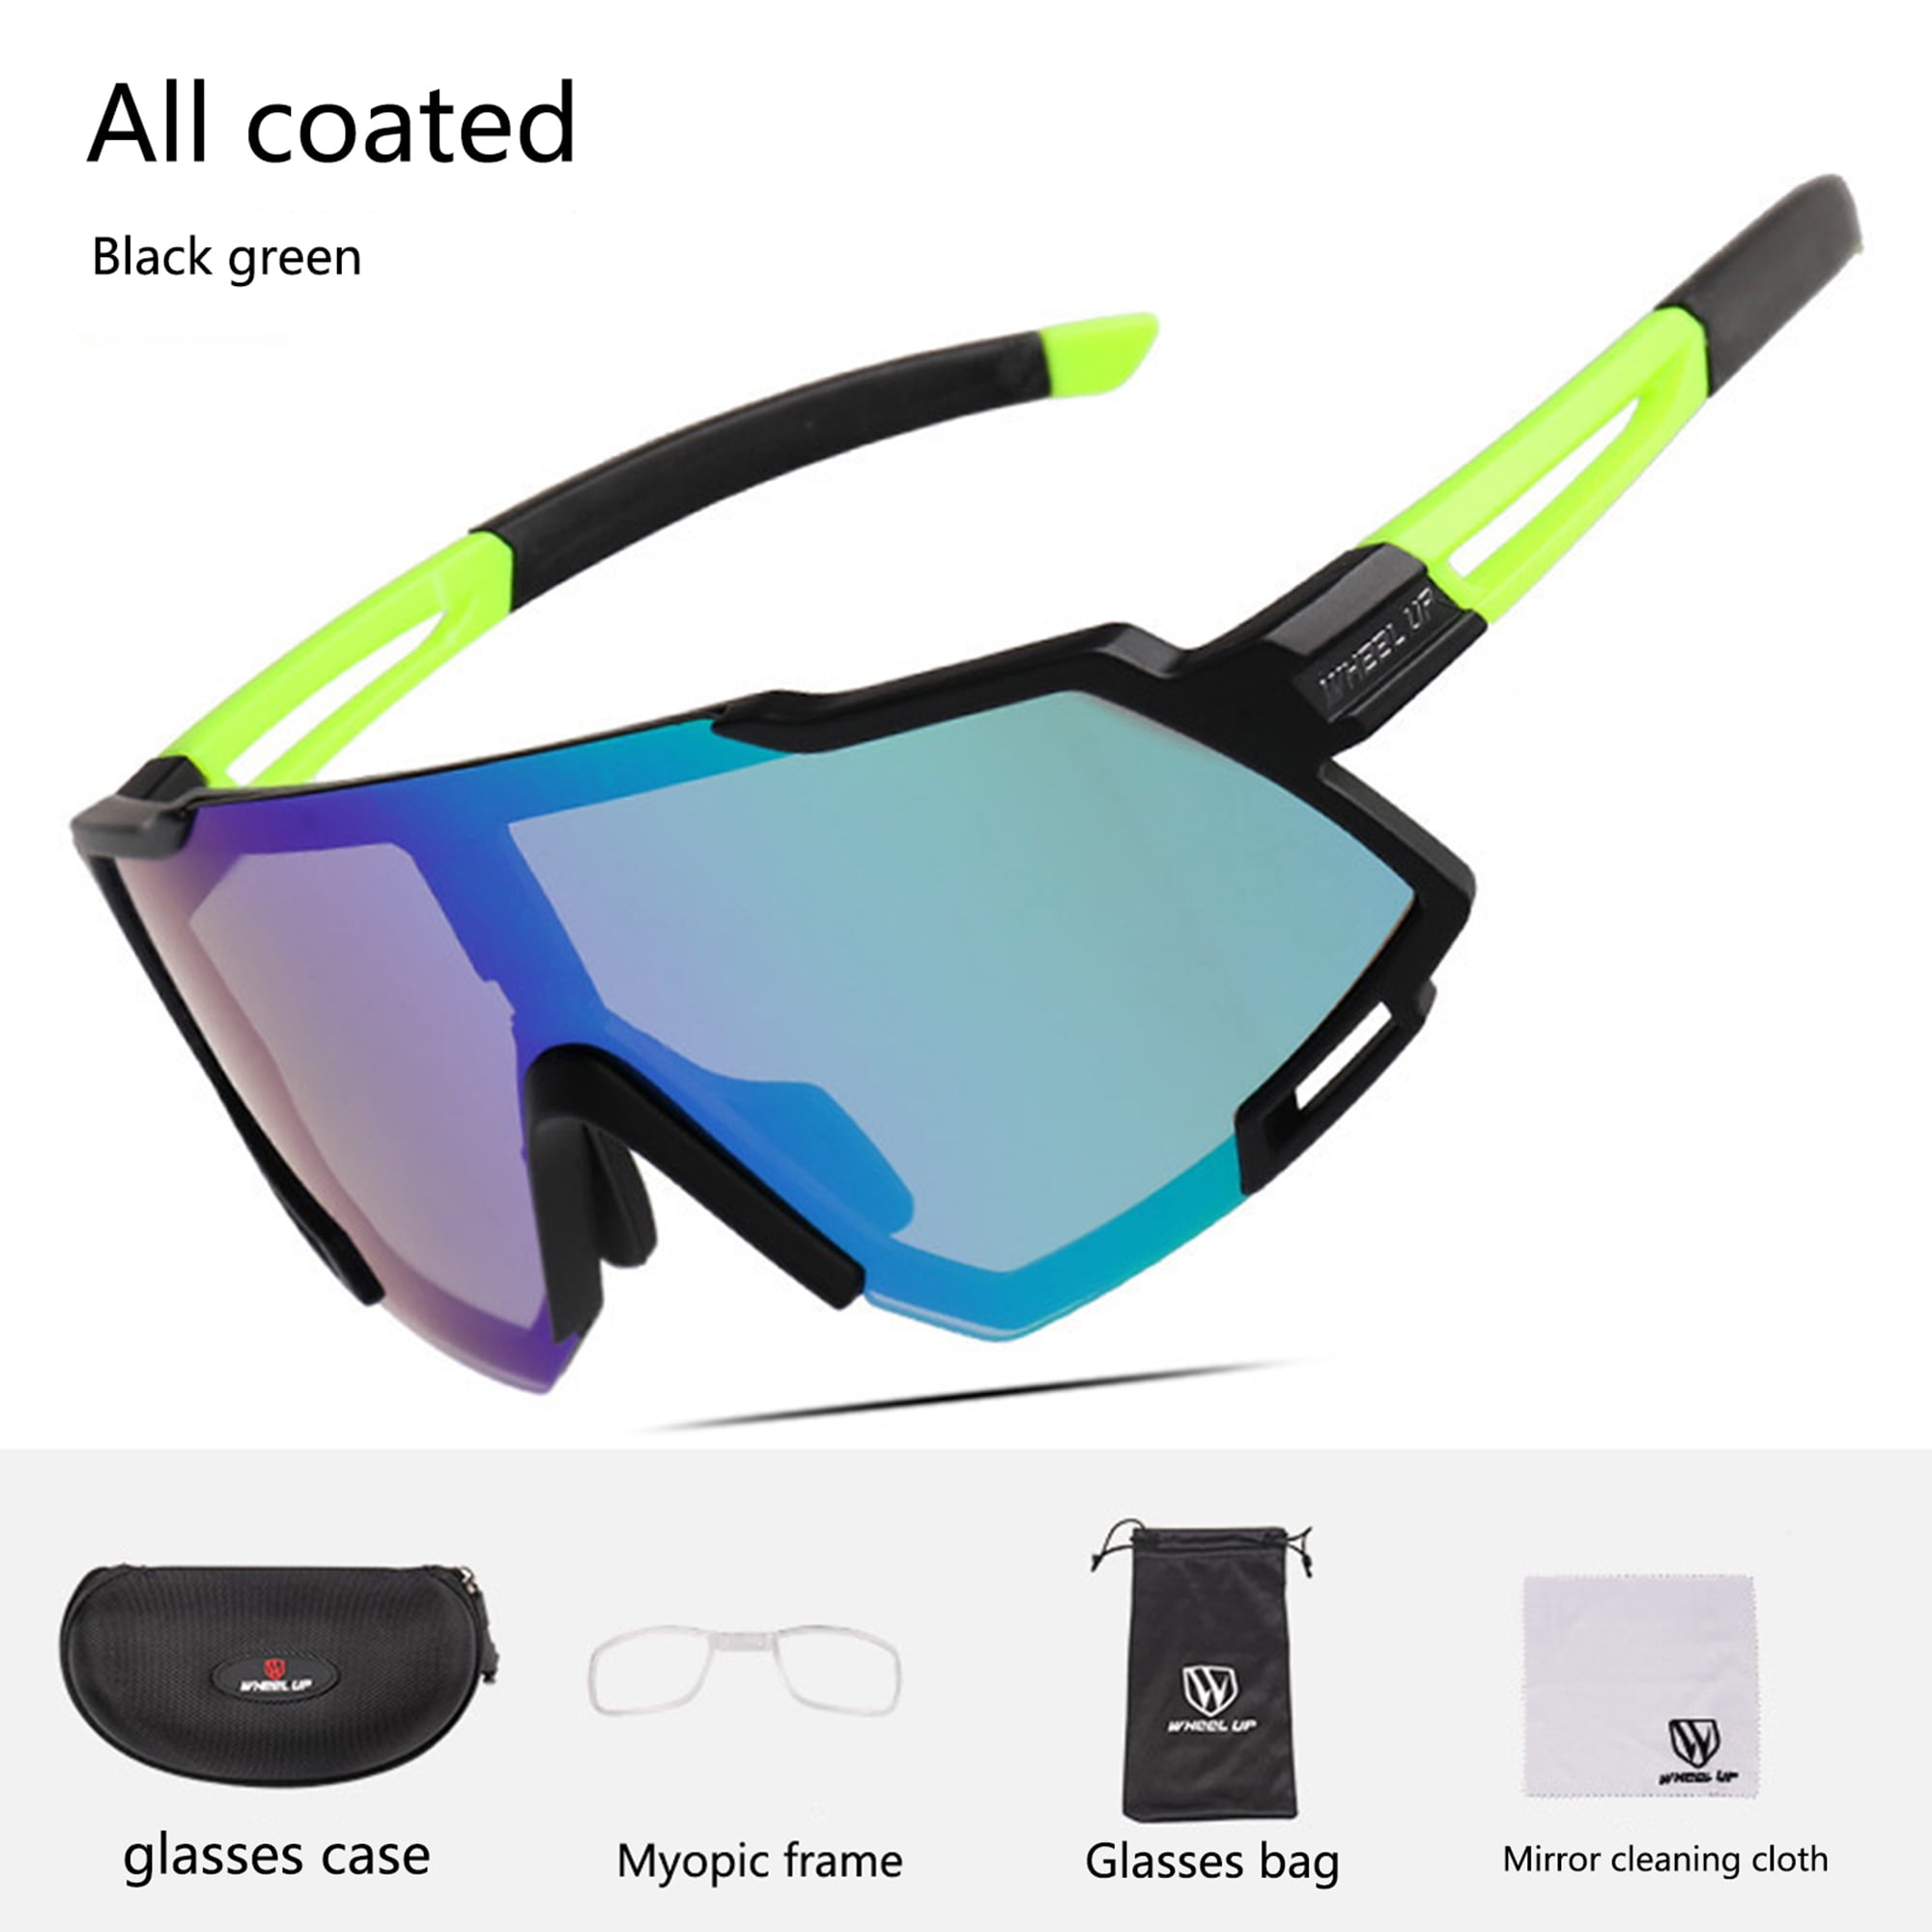 Cycling Sunglasses Windproof Goggles Outdoor Sports Bike Riding Glasses Eyewear 